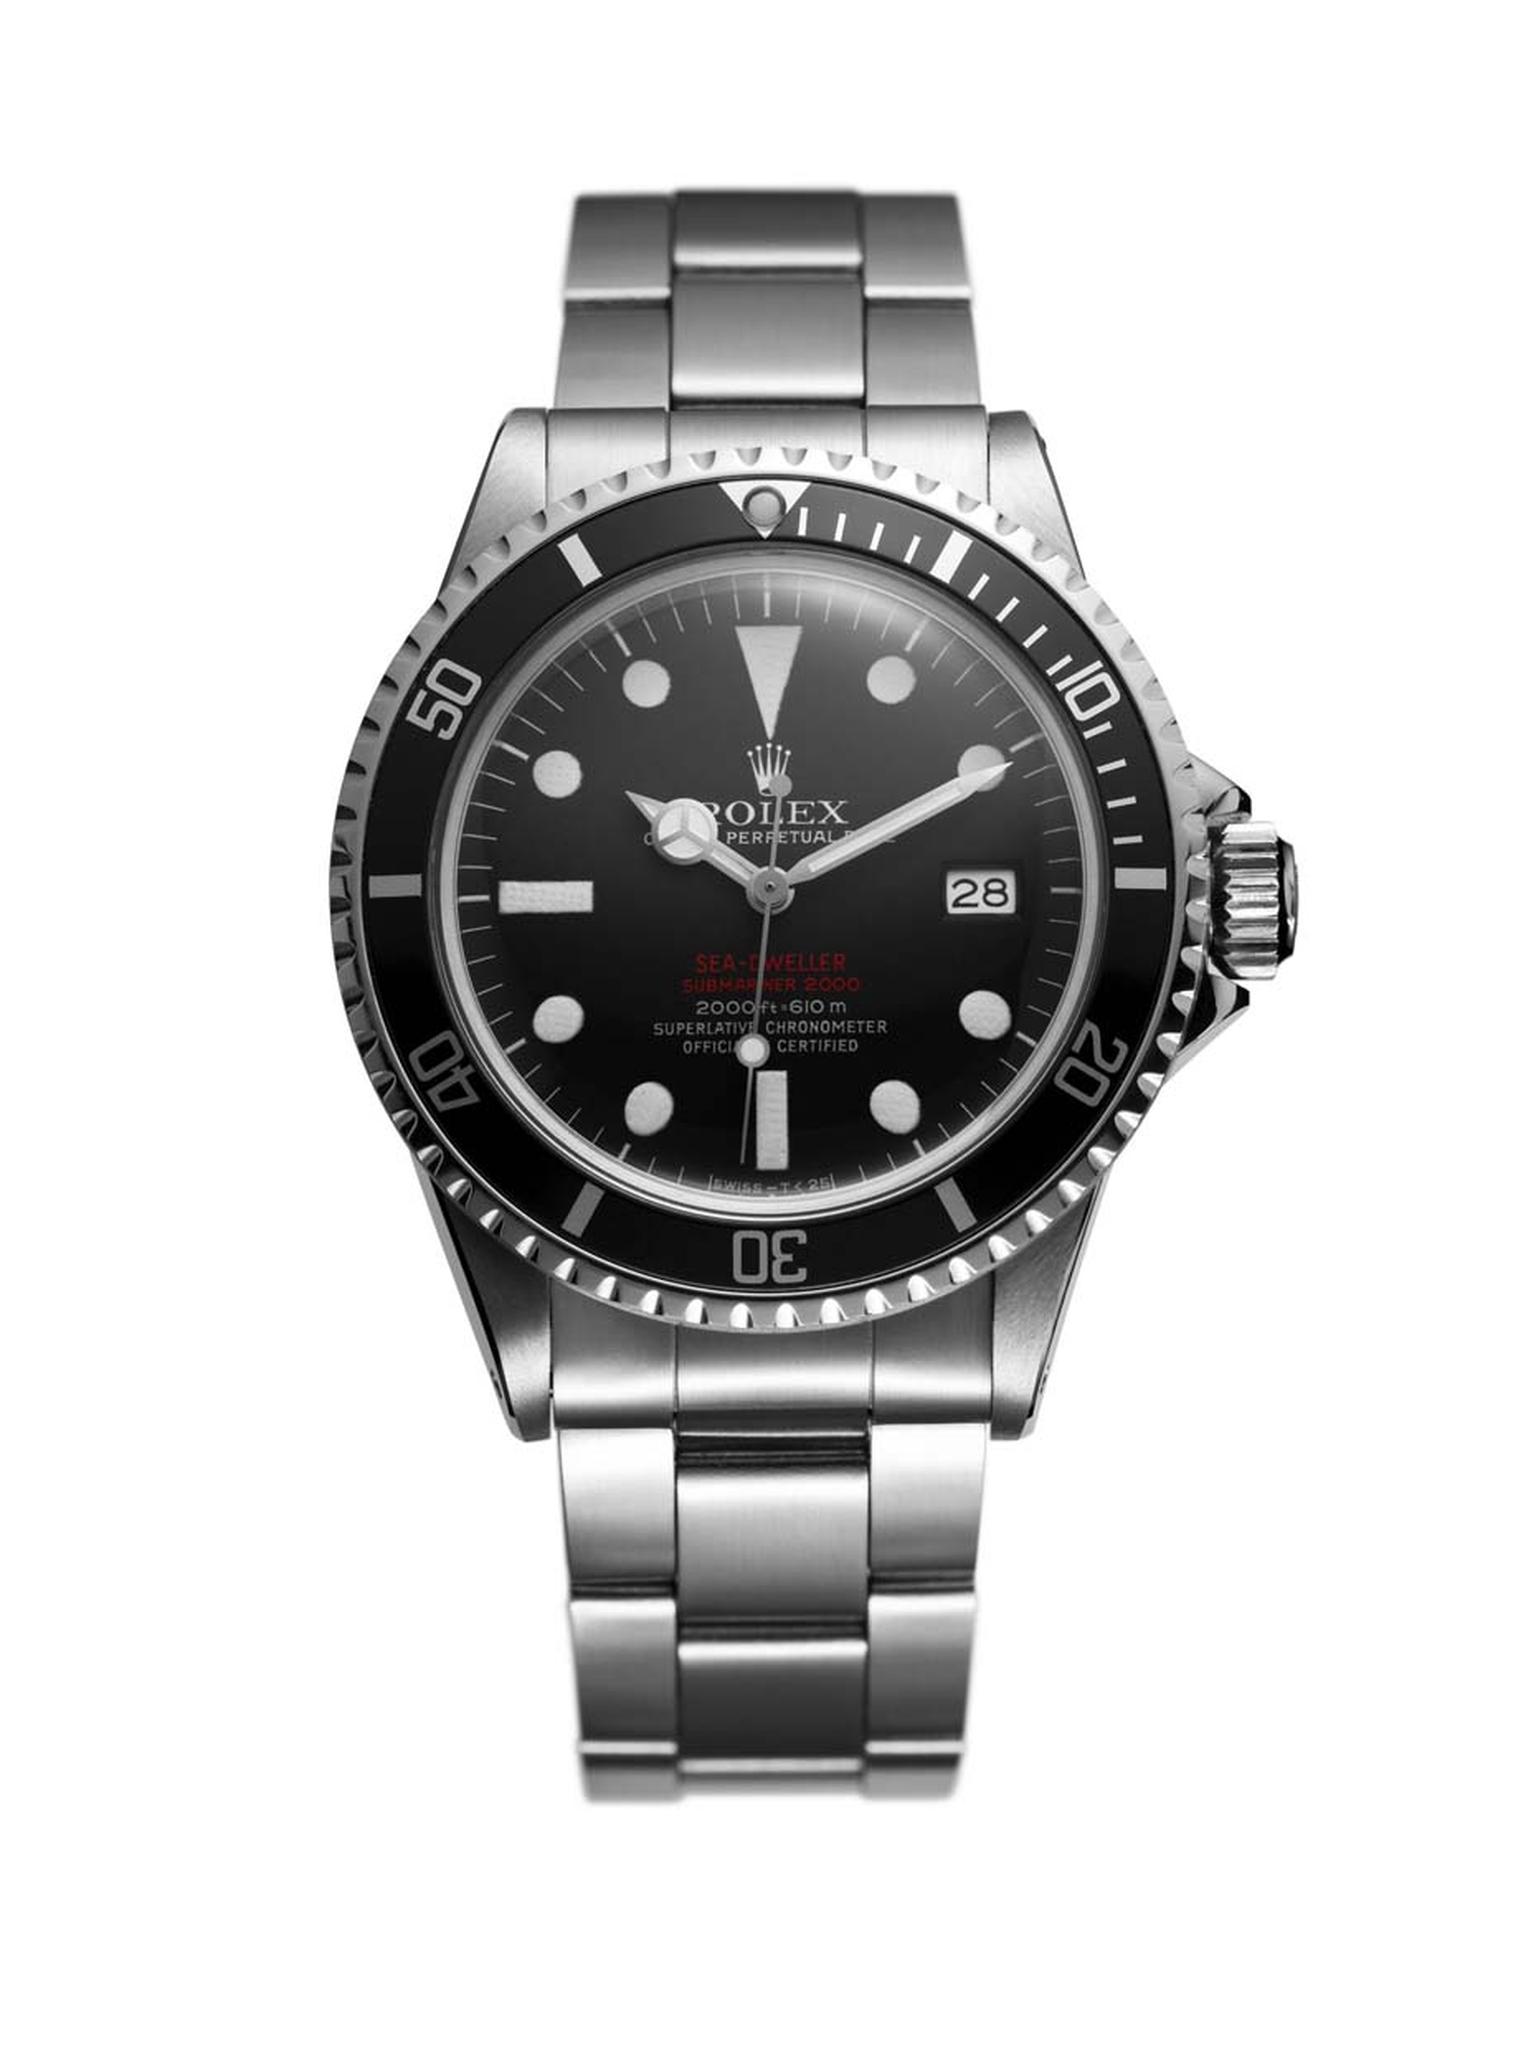 Rolex Sea-Dweller 1967 was a professional dive watch able to fathom depths of up to 600 metres.